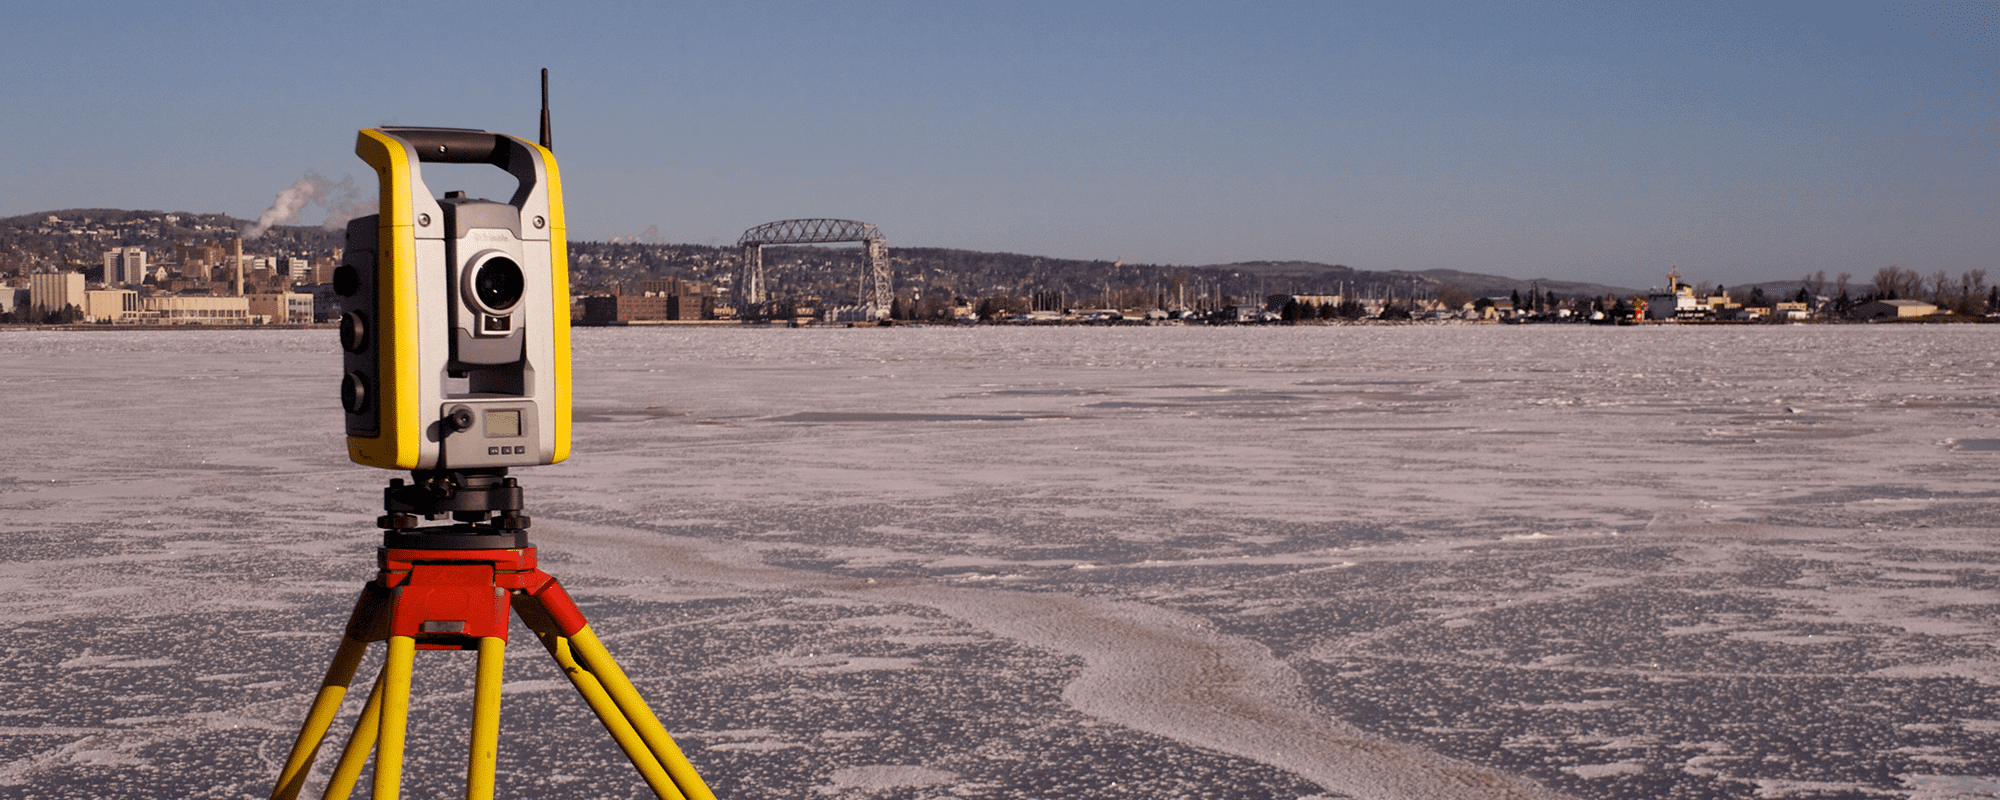 survey equipment with frozen lake and skyline in the background